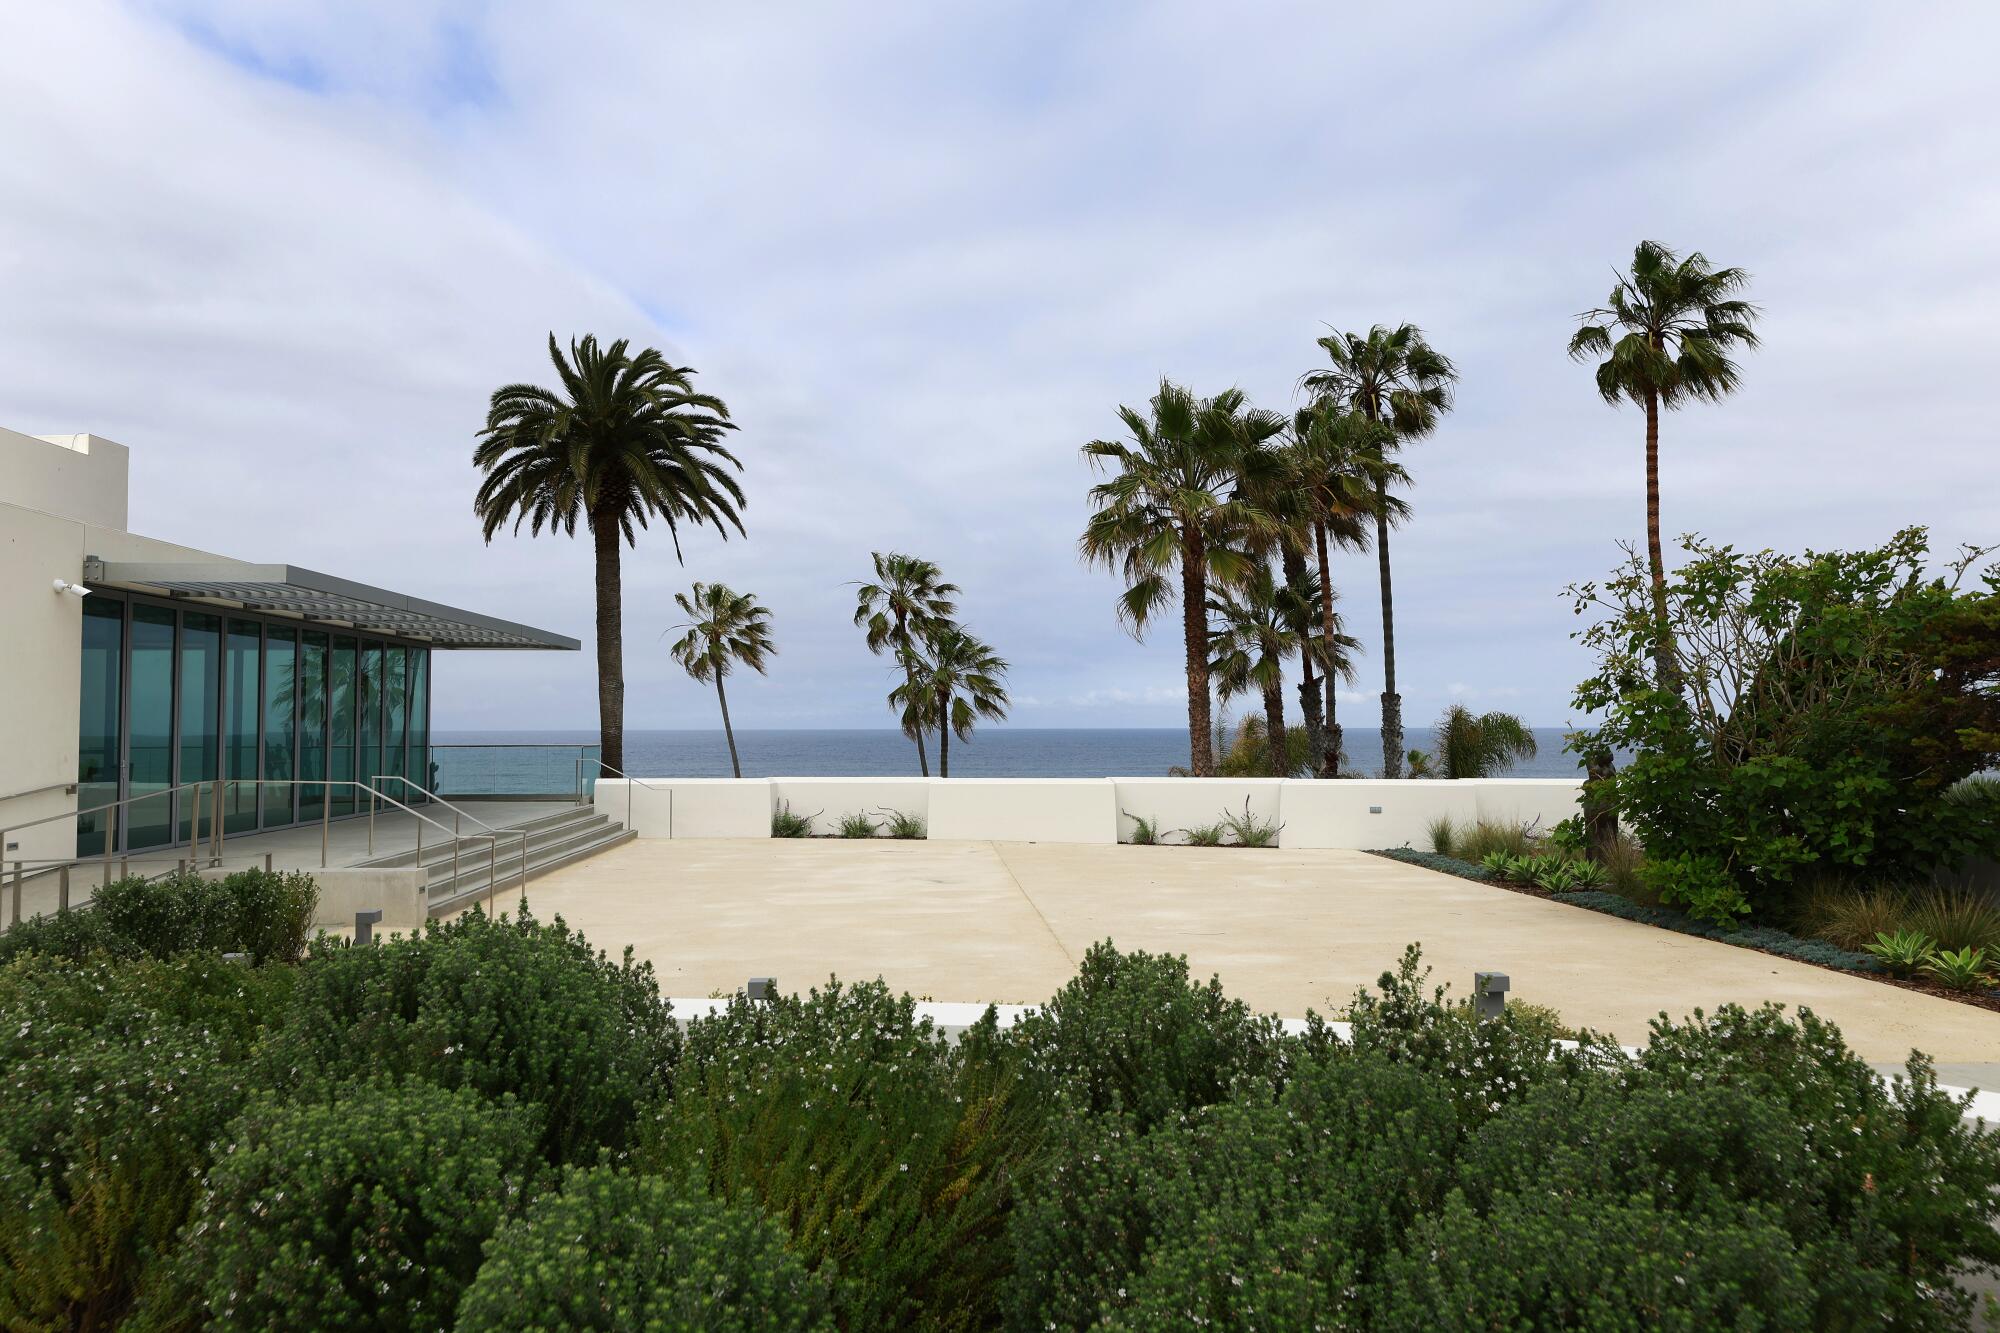 An ocean view terrace is fringed by palm trees.